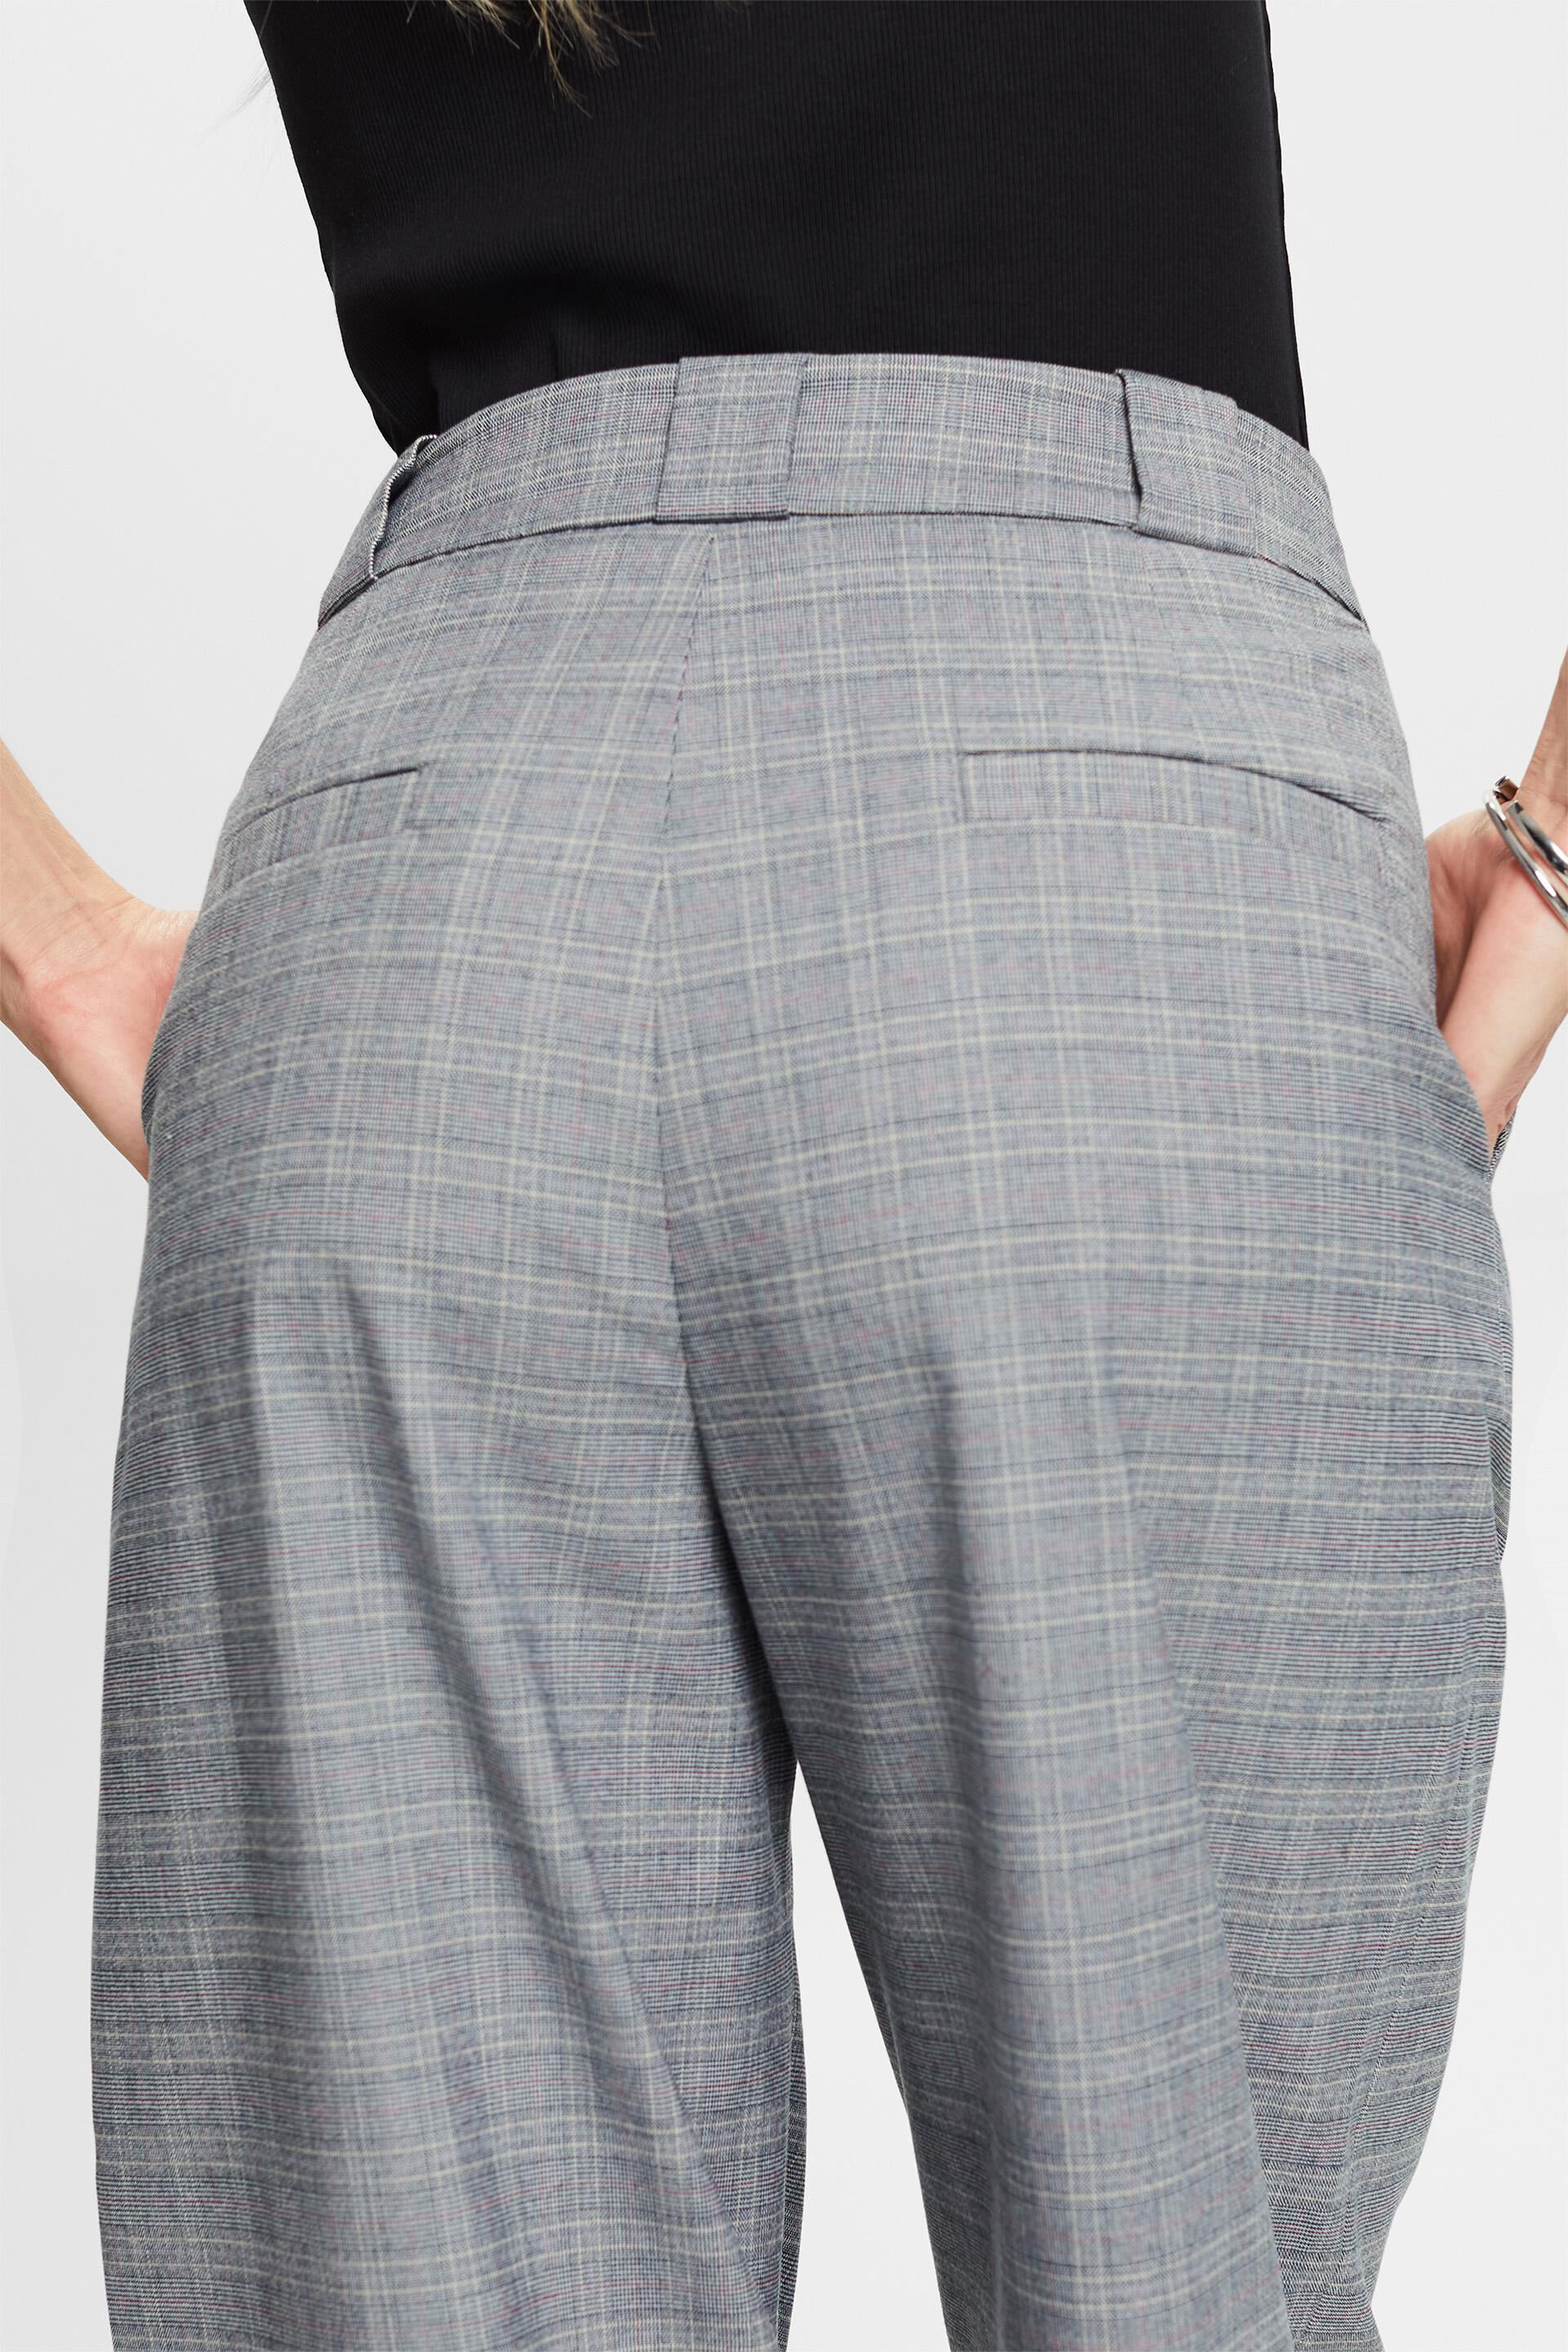 I.Code grey Prince-of-Wales check paperbag trousers